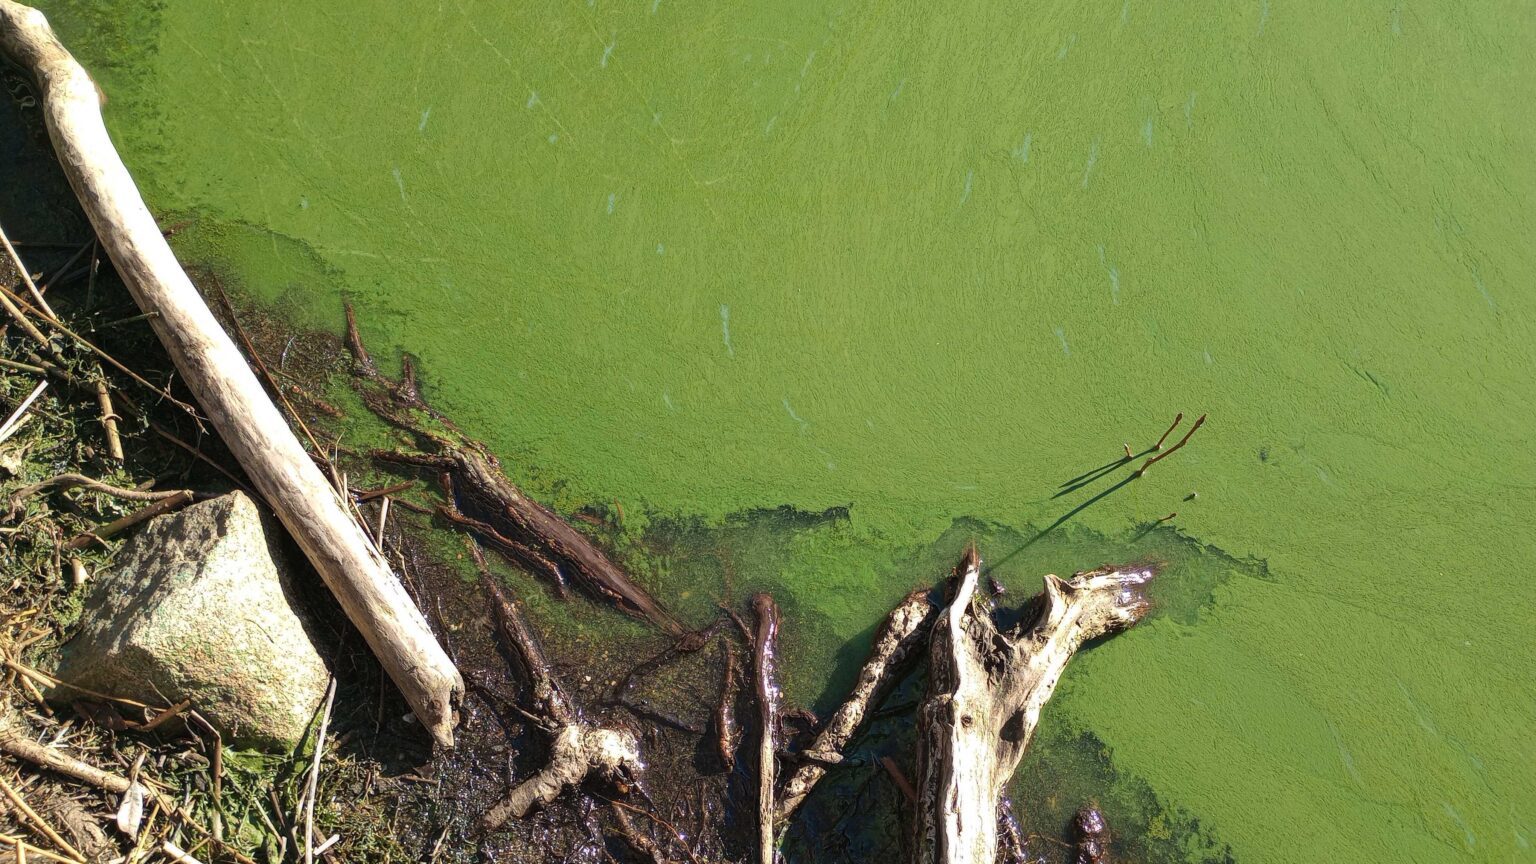 Algae blooms color waters on the shores of Lake Padden in late January. Whatcom County officials reported March 7 that no toxins were detected in recent water samples.